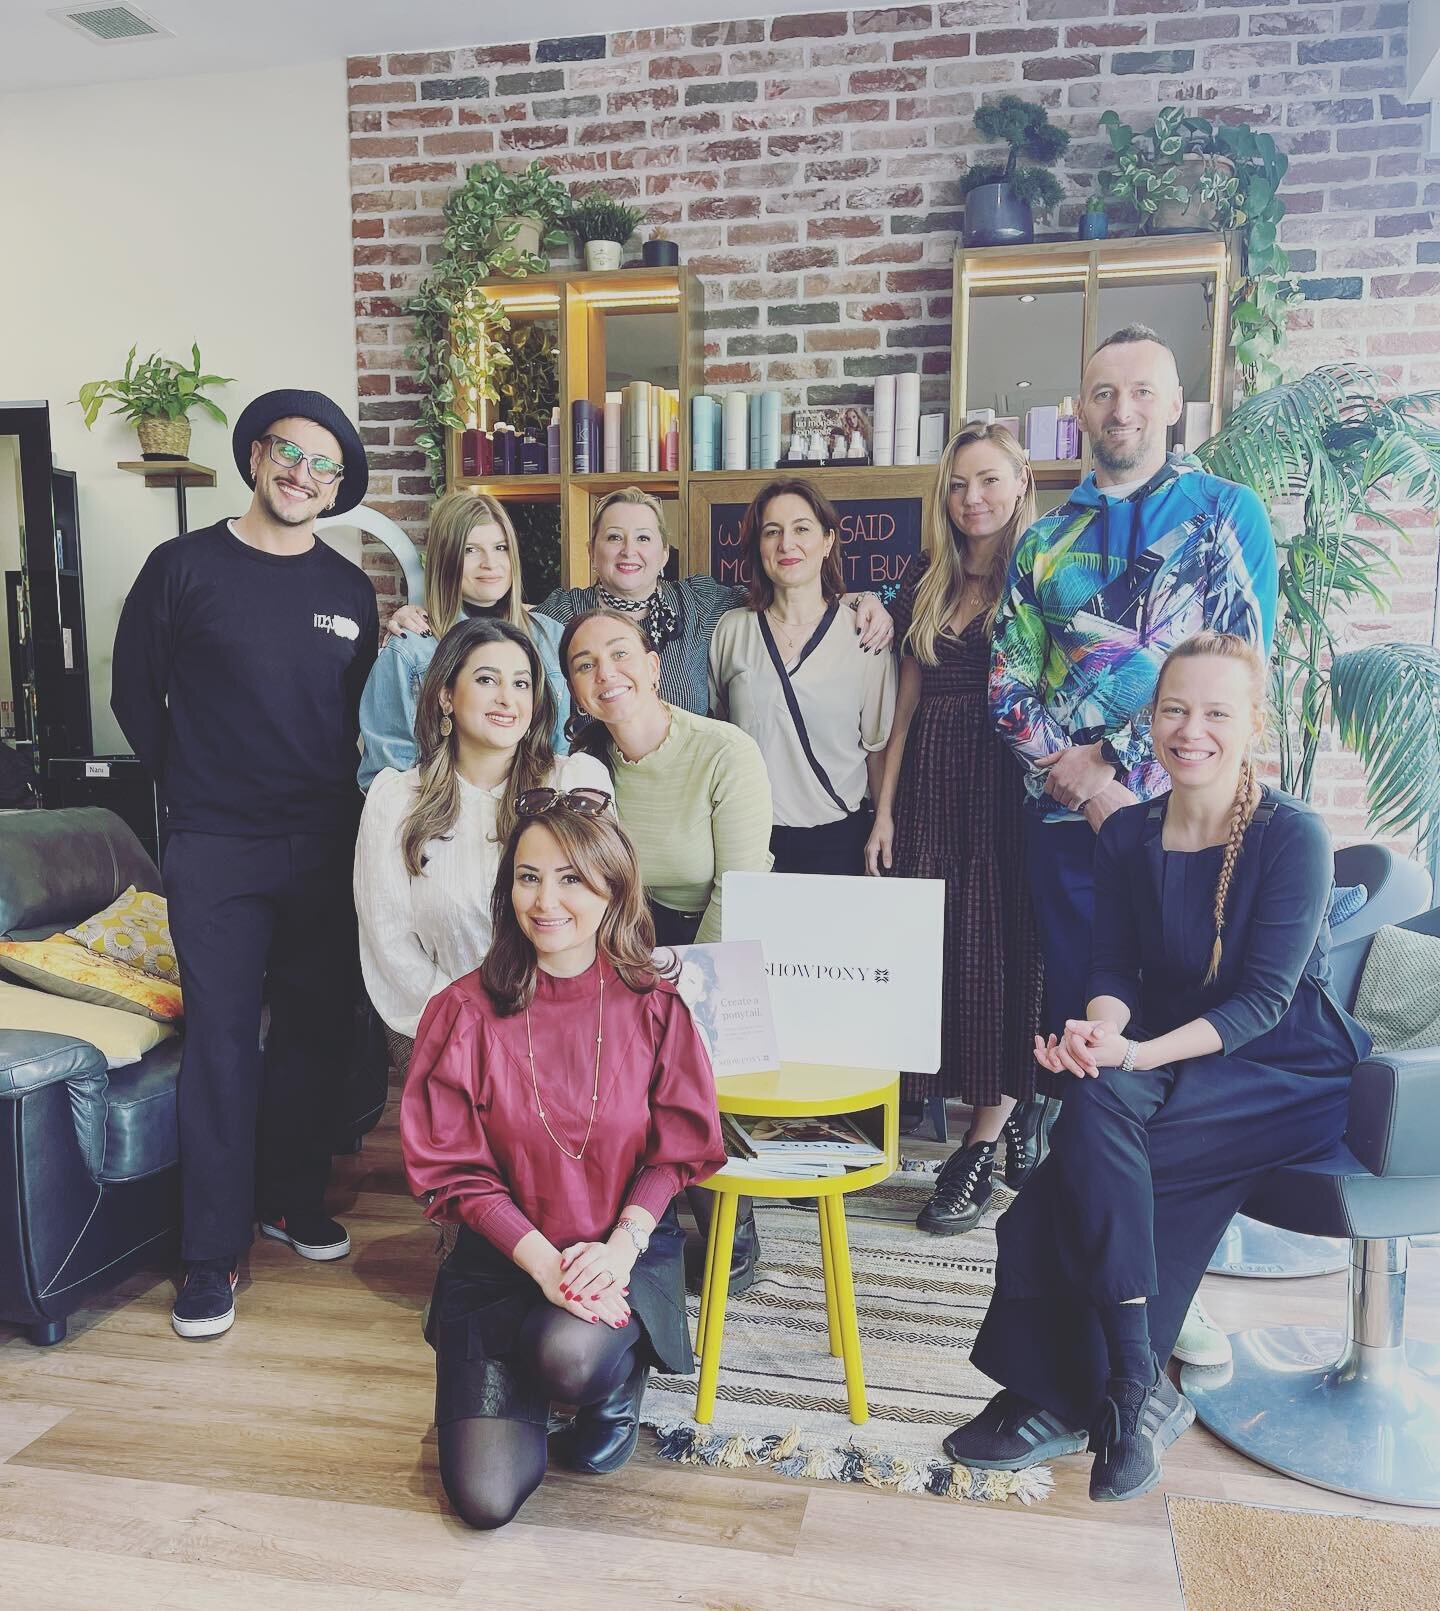 SHOW PONY Training at Care.Salon by The Master Extensionist @jakewilliams.hair 
Thank you for visiting us Jake! You&rsquo;re amazing! 
Also a big thank you to @charlotte.sweetsquared and talented @orsi_kevinmurphy_educator for keeping us up to date w